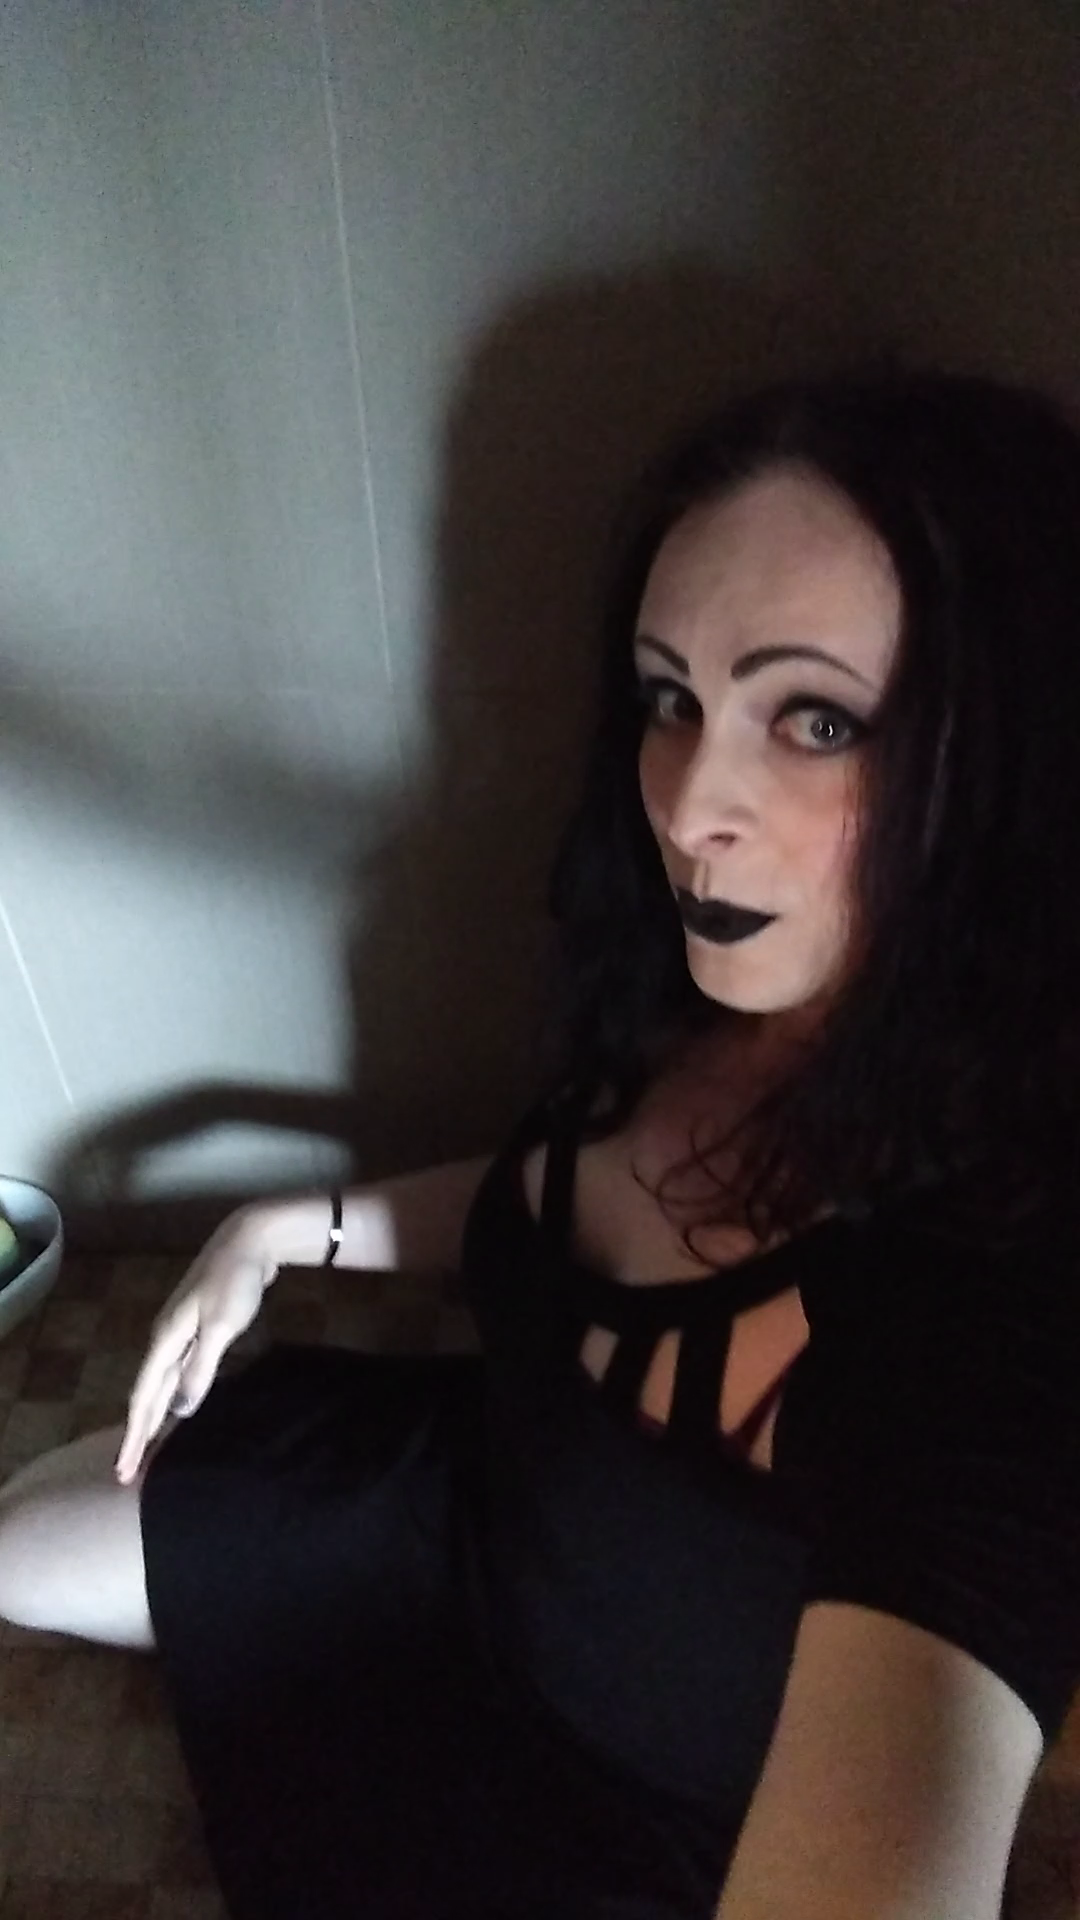 Watch the Video by LynnLandra with the username @LynnLandra, who is a star user, posted on June 2, 2019. The post is about the topic GivePissAChance. and the text says 'Getting drenched and loving it!!!'